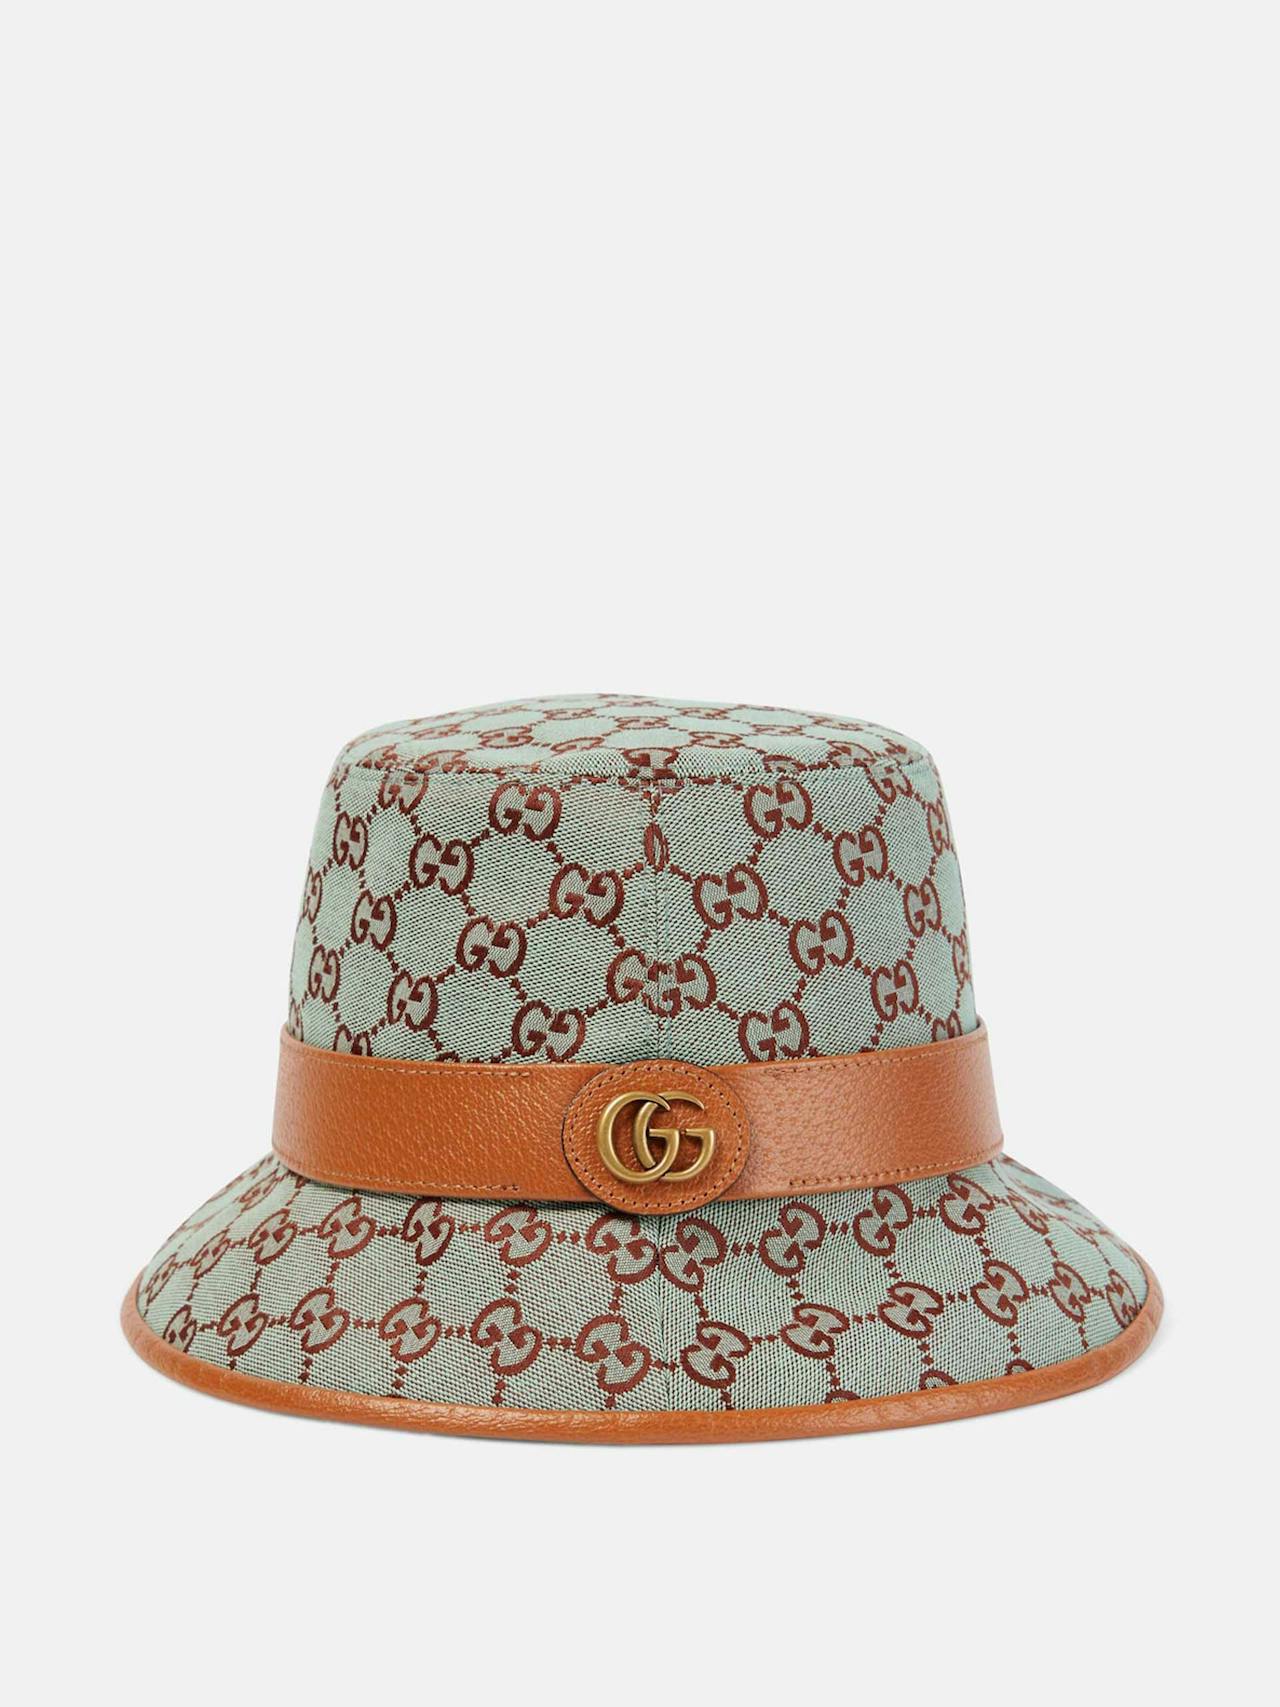 Jago GG leather-trimmed bucket hat